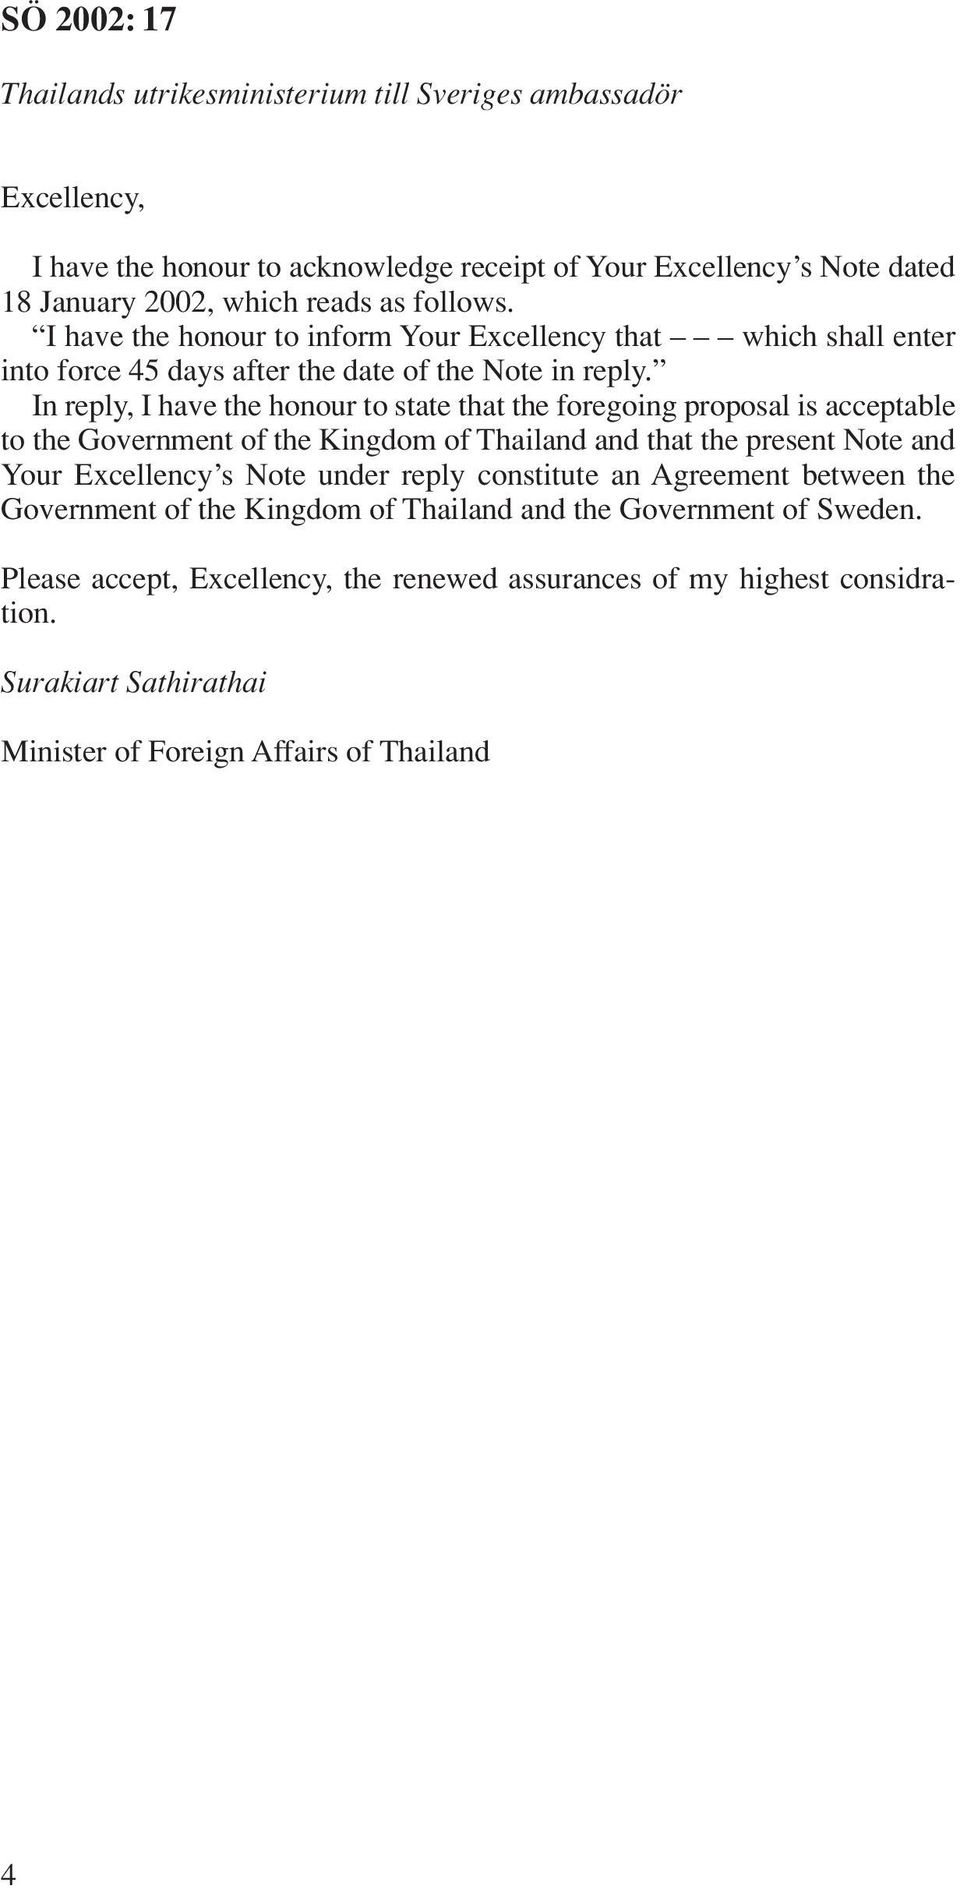 In reply, I have the honour to state that the foregoing proposal is acceptable to the Government of the Kingdom of Thailand and that the present Note and Your Excellency s Note under